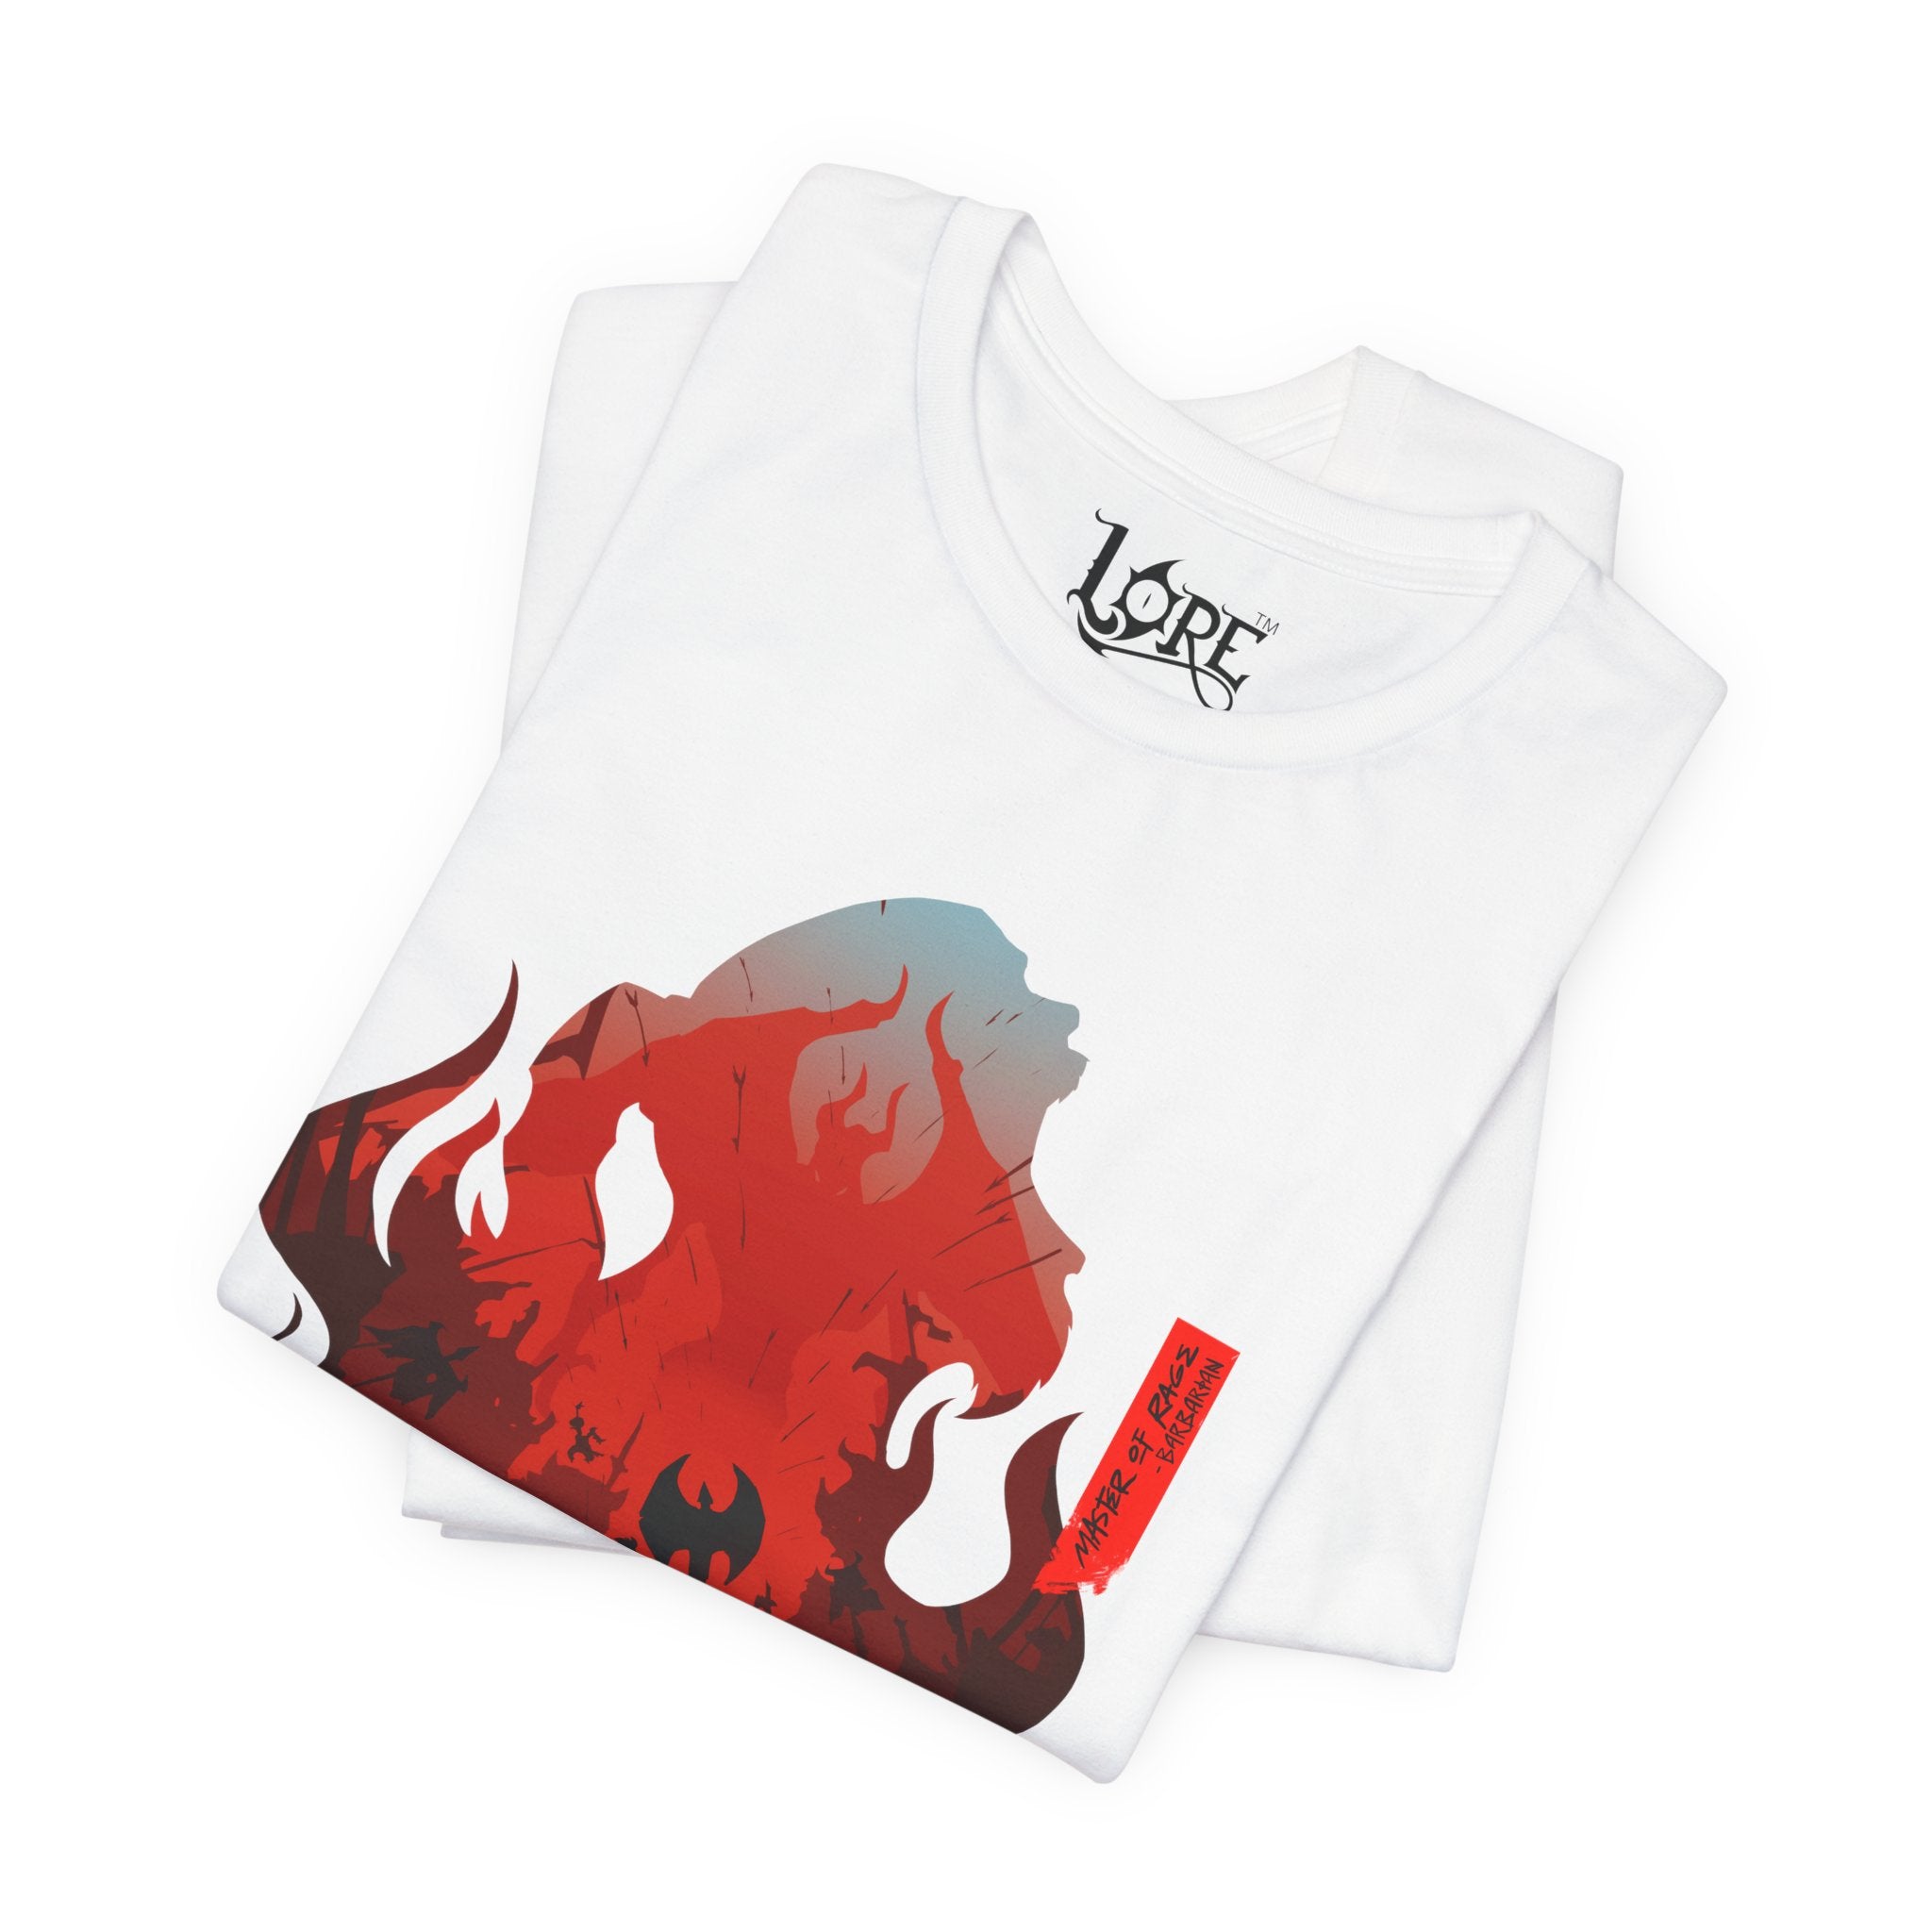 BARBARIAN CLASS SILHOUETTE T-SHIRT - RED BANNER EDITION